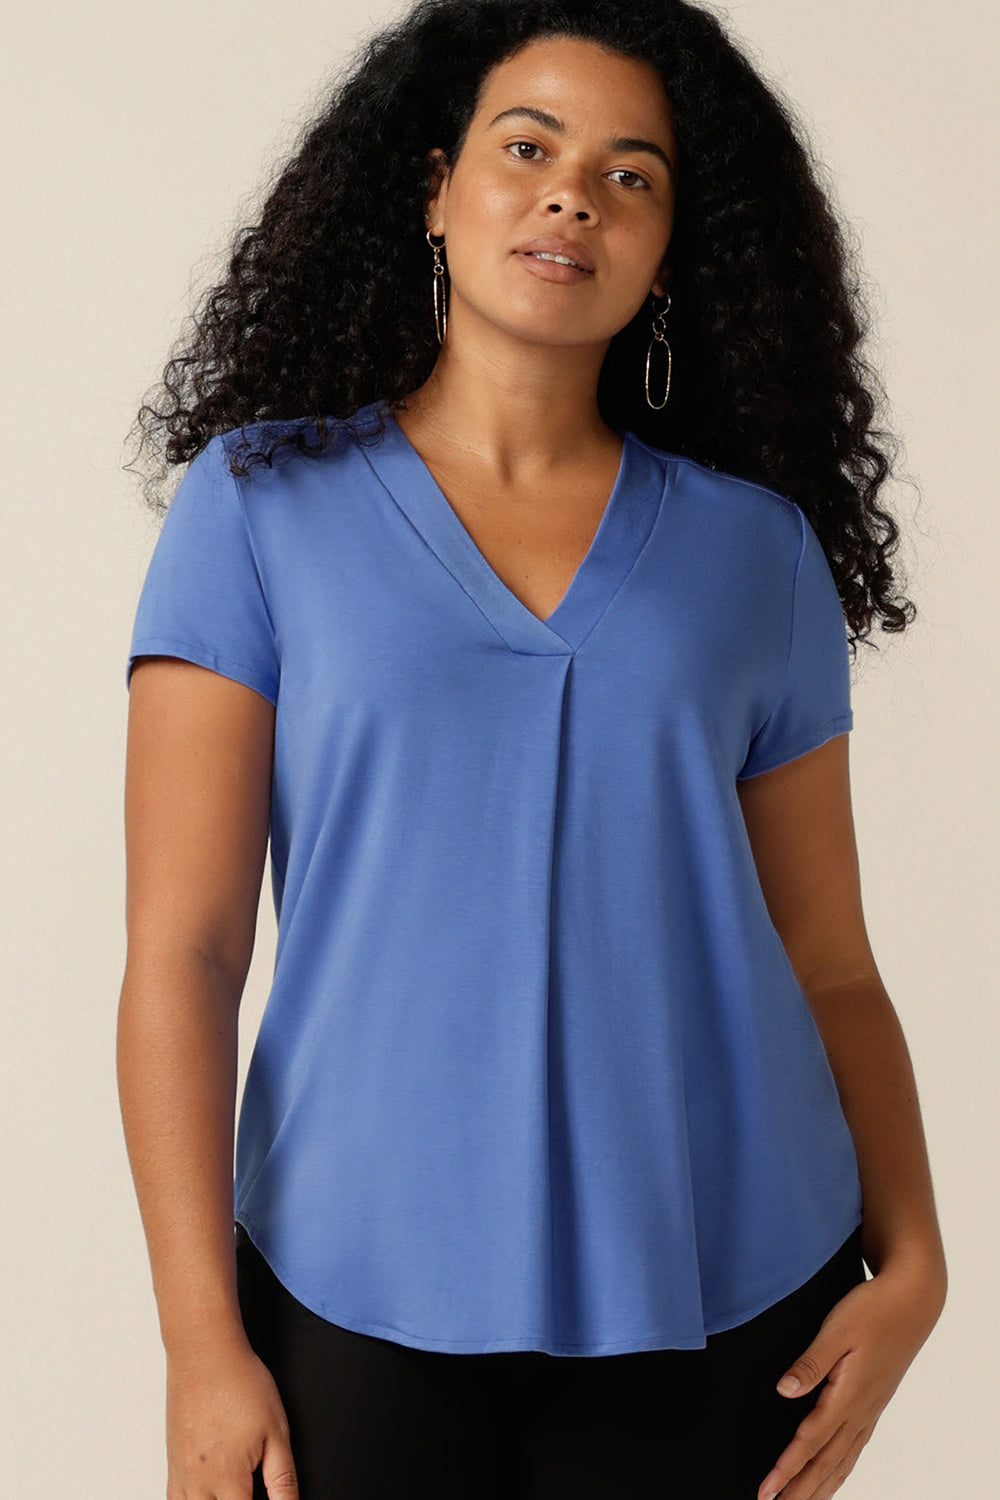 A curvy size 12 woman wears a short-sleeved V-neck top in bamboo jersey. Lightweight, breathable and made from natural fibres, bamboo jersey makes for a comfortable and cool jersey top. In sustainable fibres, this bamboo jersey top was made in Australia by Leina and Fleur, just 2 of the ways L&F is working towards producing more eco-conscious, sustainable fashion.  